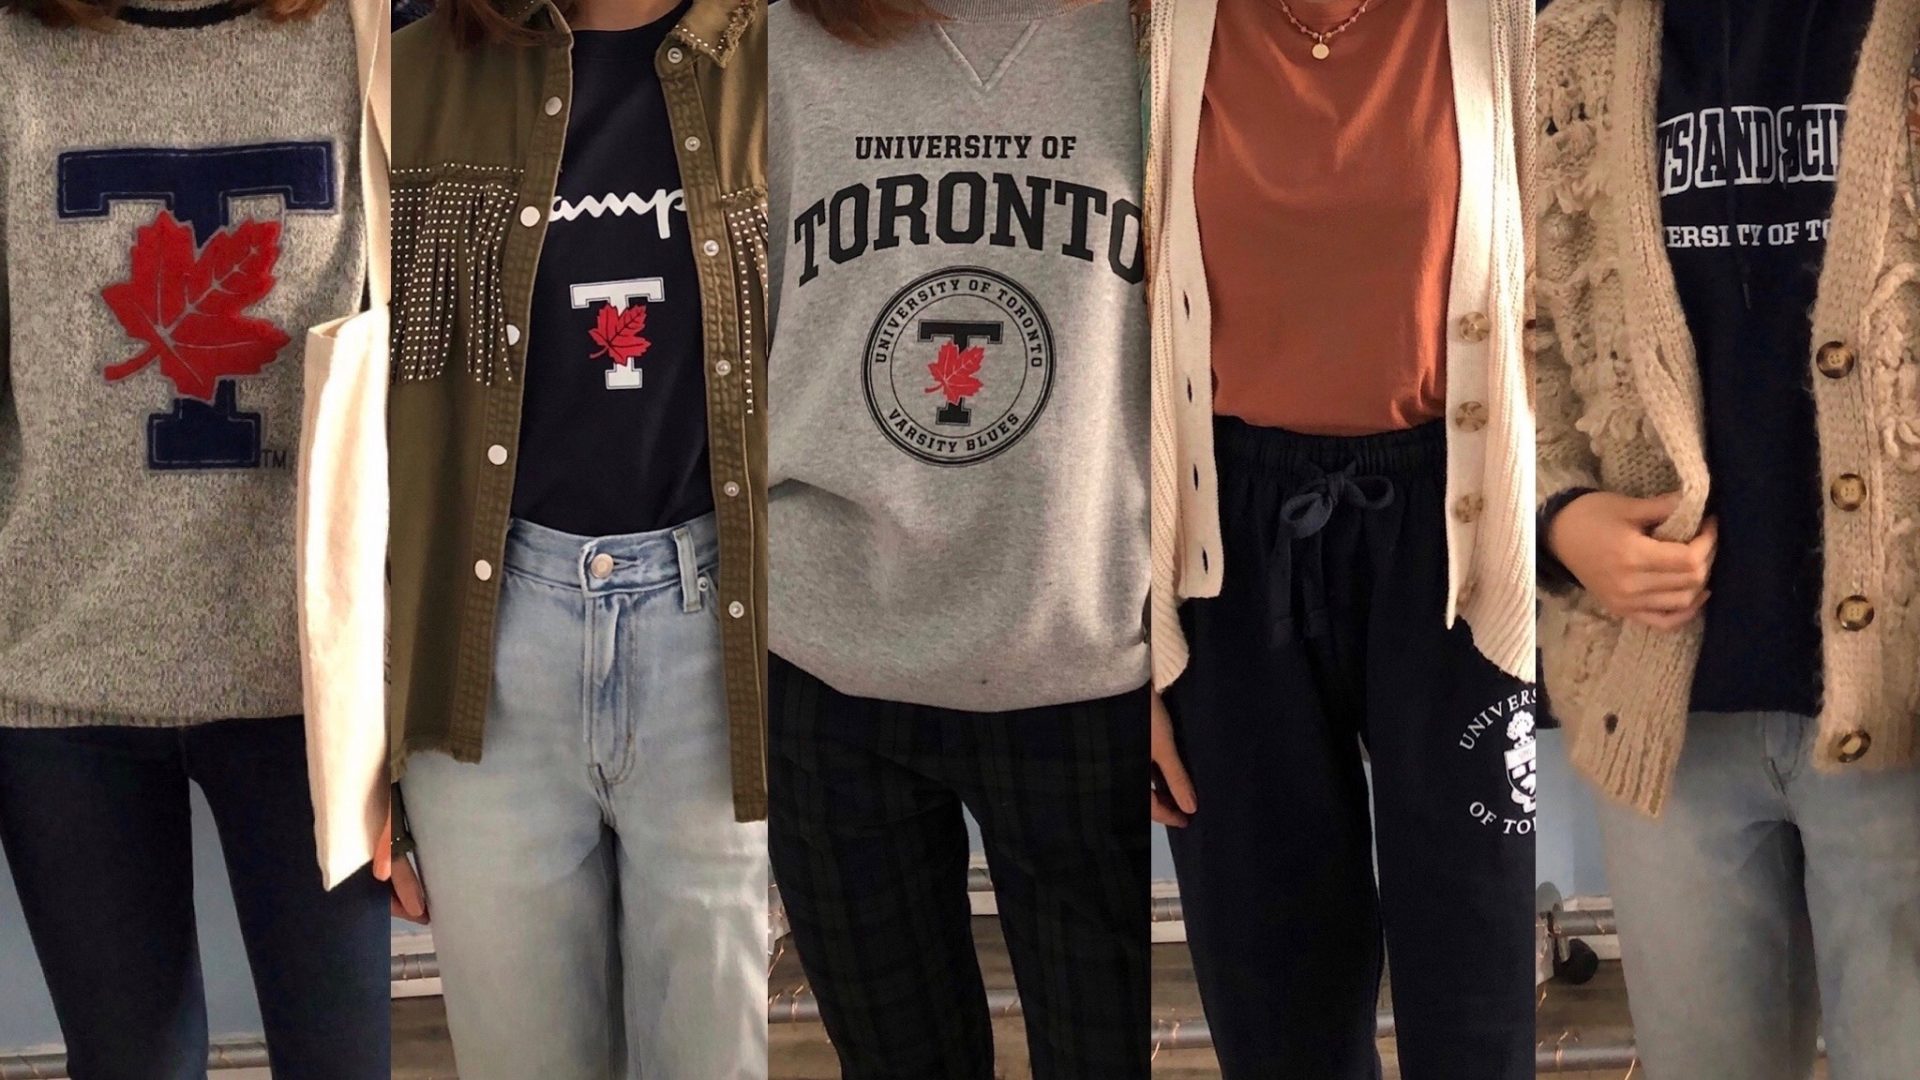 Picture of 5 outfits with U of T clohtes